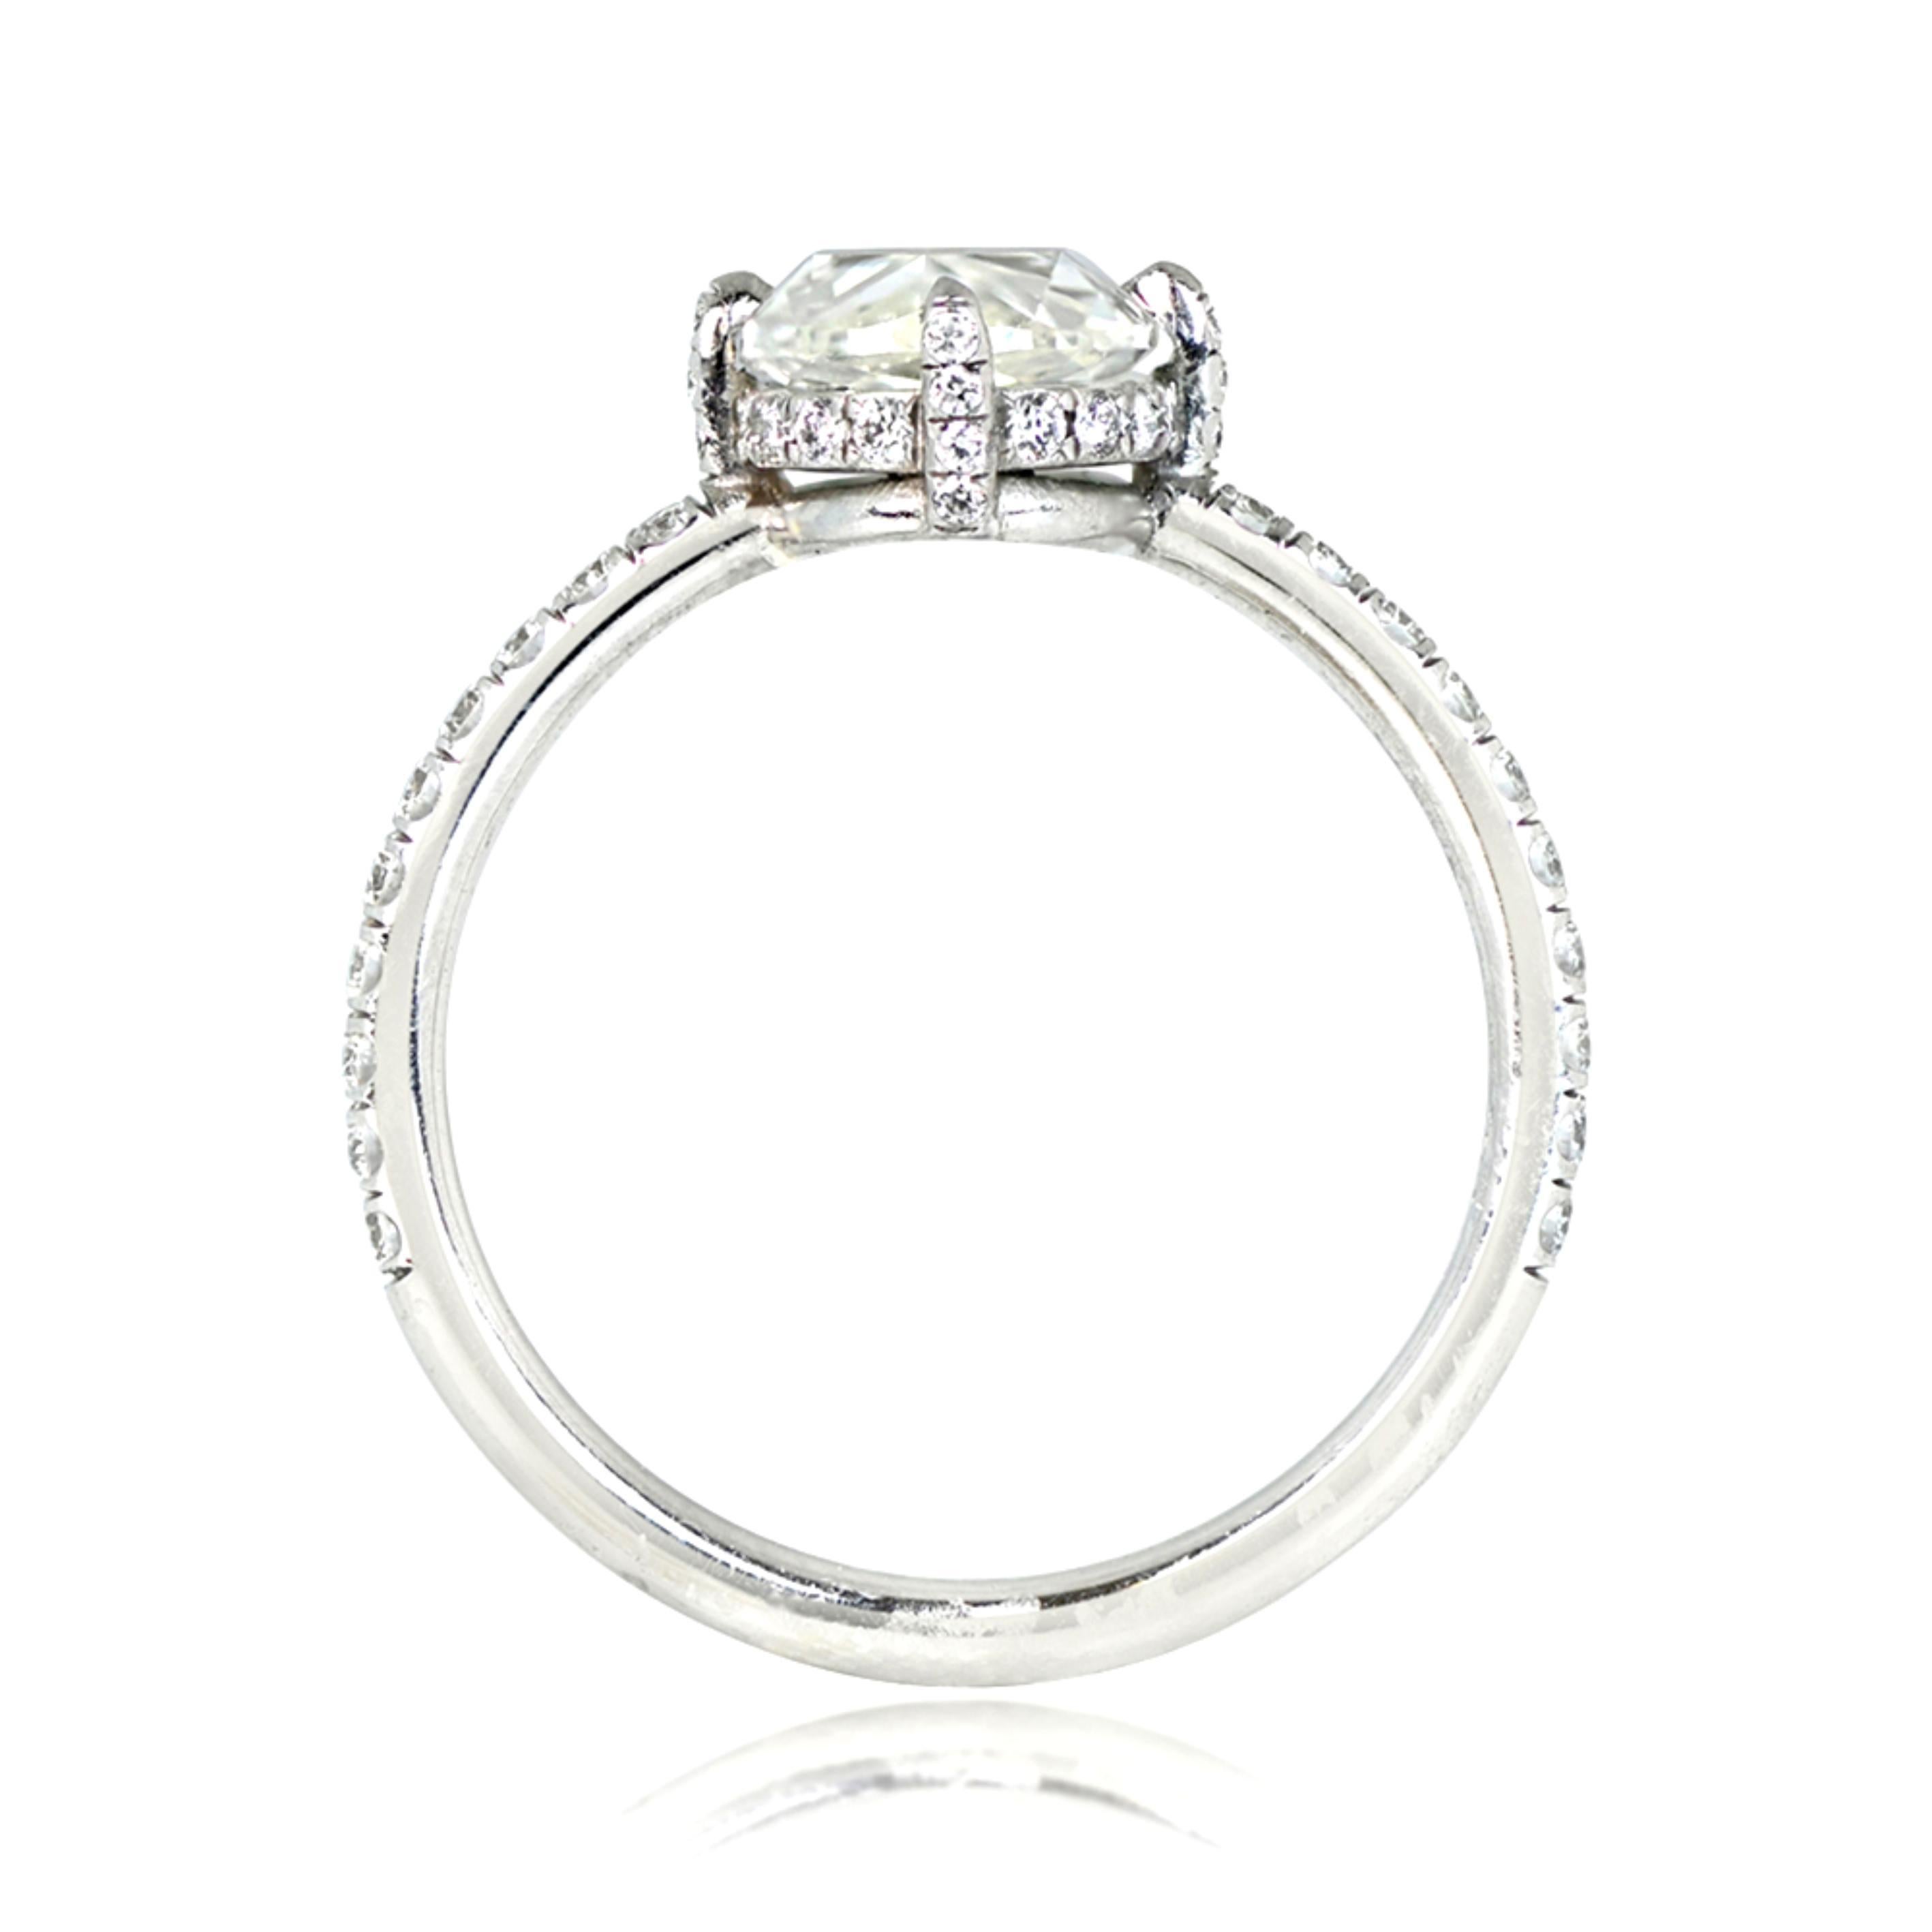 Exquisitely crafted in platinum, this engagement ring boasts a stunning 1.55 carat, oval-shaped rose cut diamond, with I color and VS1 clarity, set in elegant prongs. Along the shoulders and shank, micro-pave round brilliant cut diamonds provide a